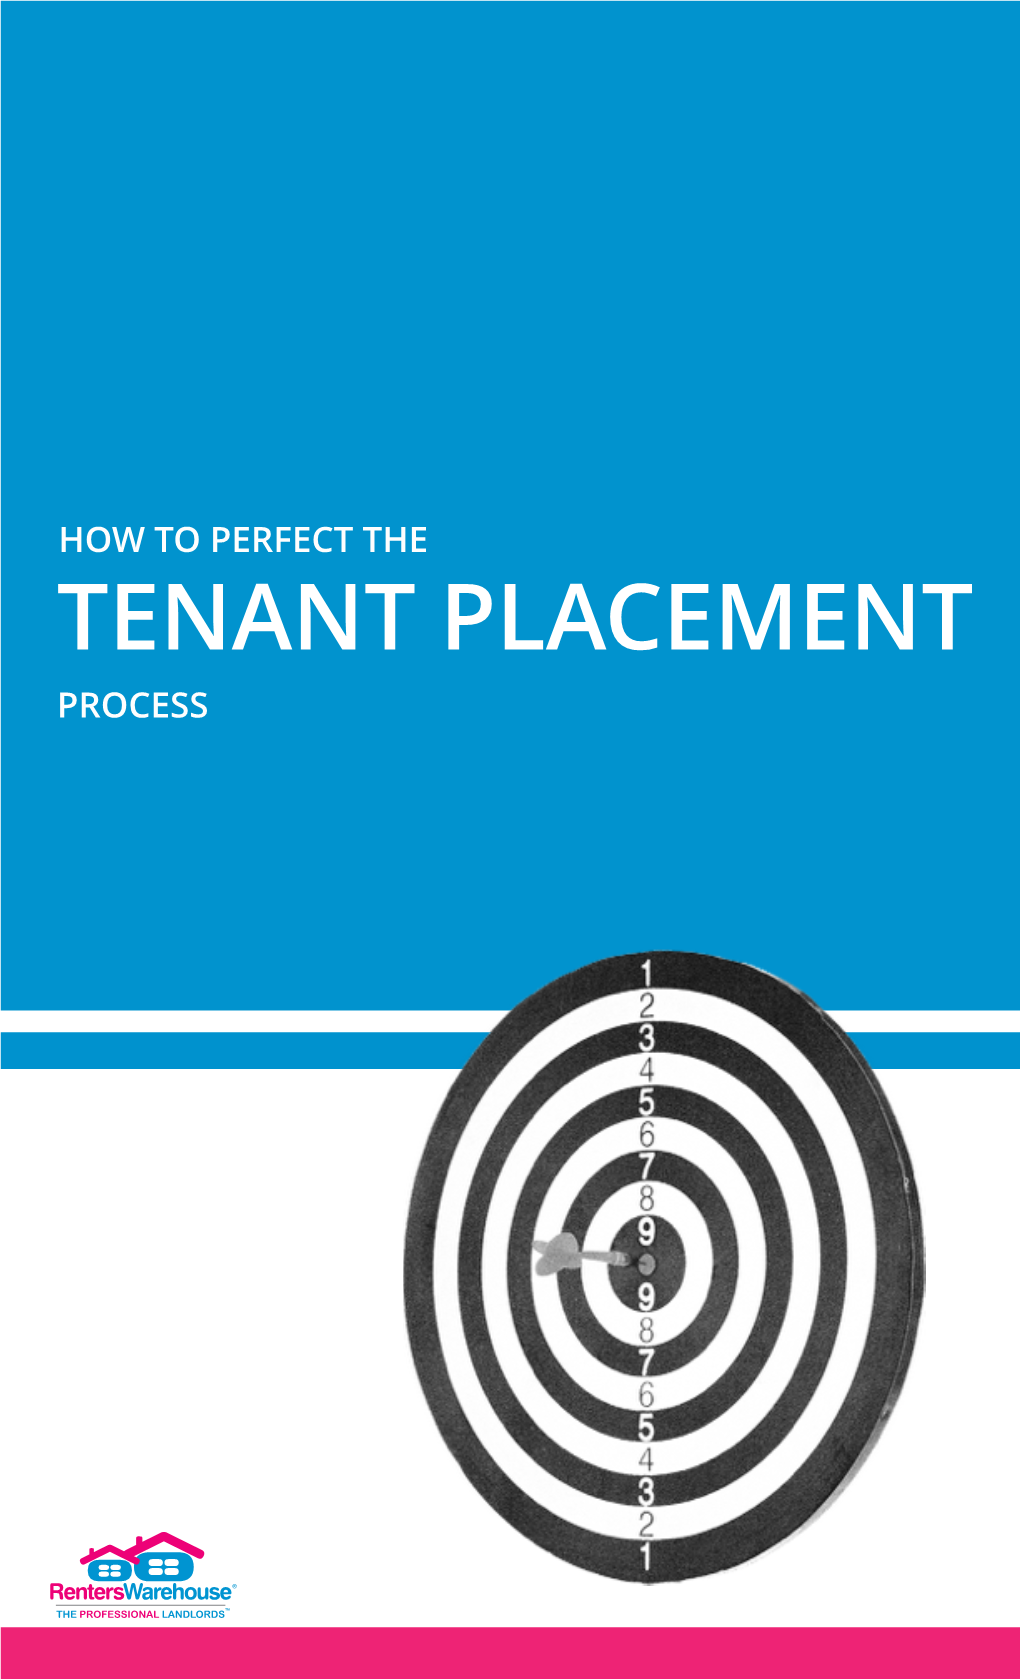 How to Perfect the Tenant Placement Process